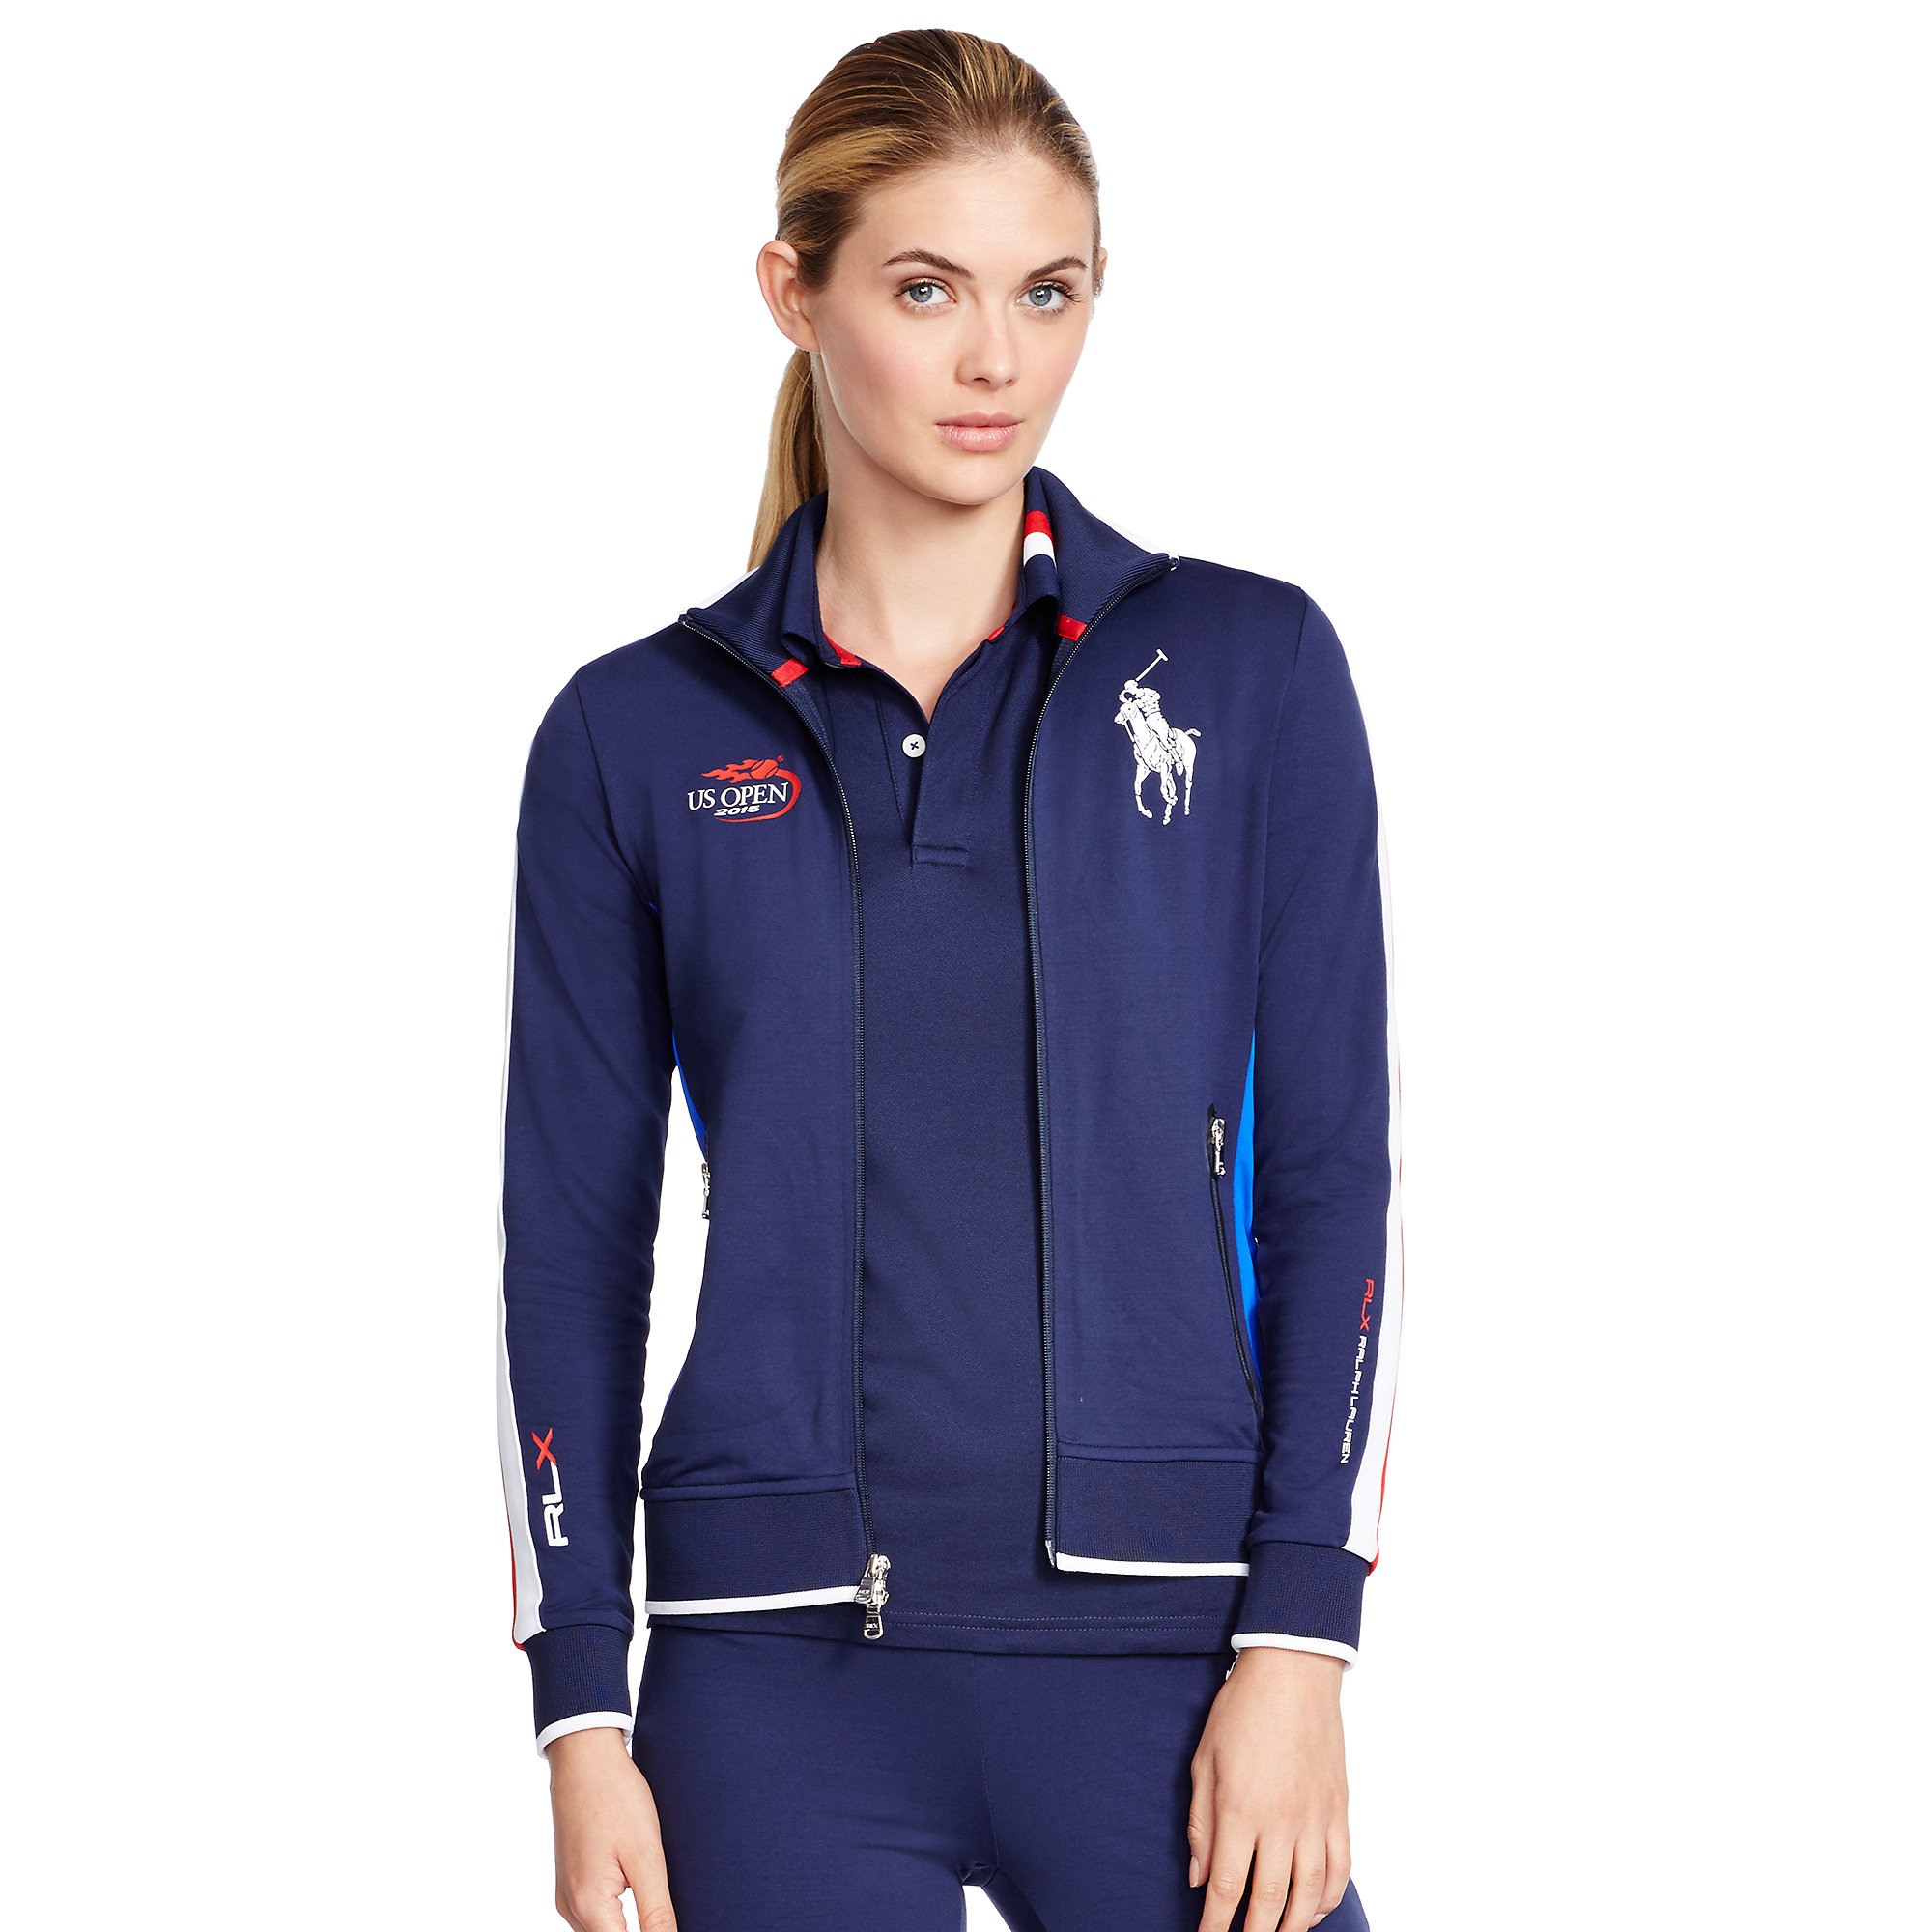 Ralph Lauren Us Open Ball Girl Track Jacket in French Navy (Blue) - Lyst